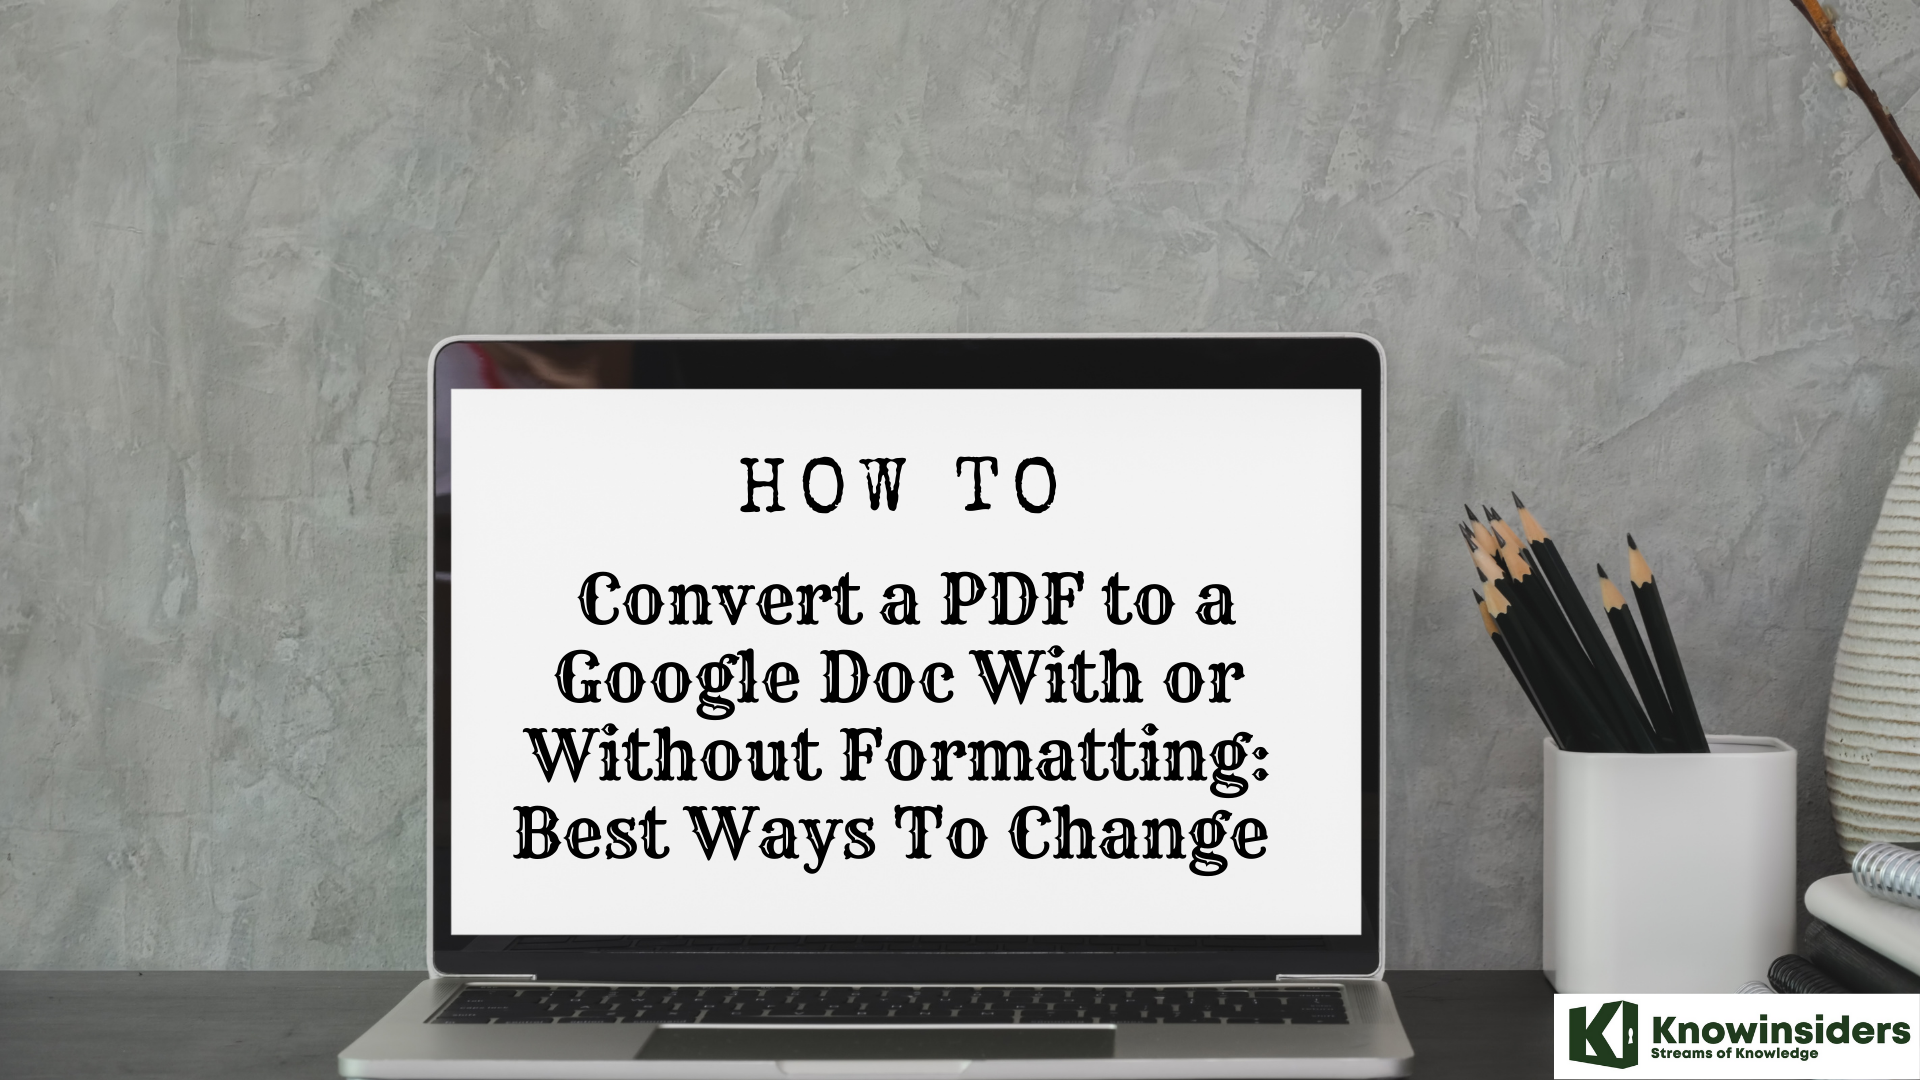 Simpliest Ways to Convert a PDF to a Google Doc With or Without Formatting